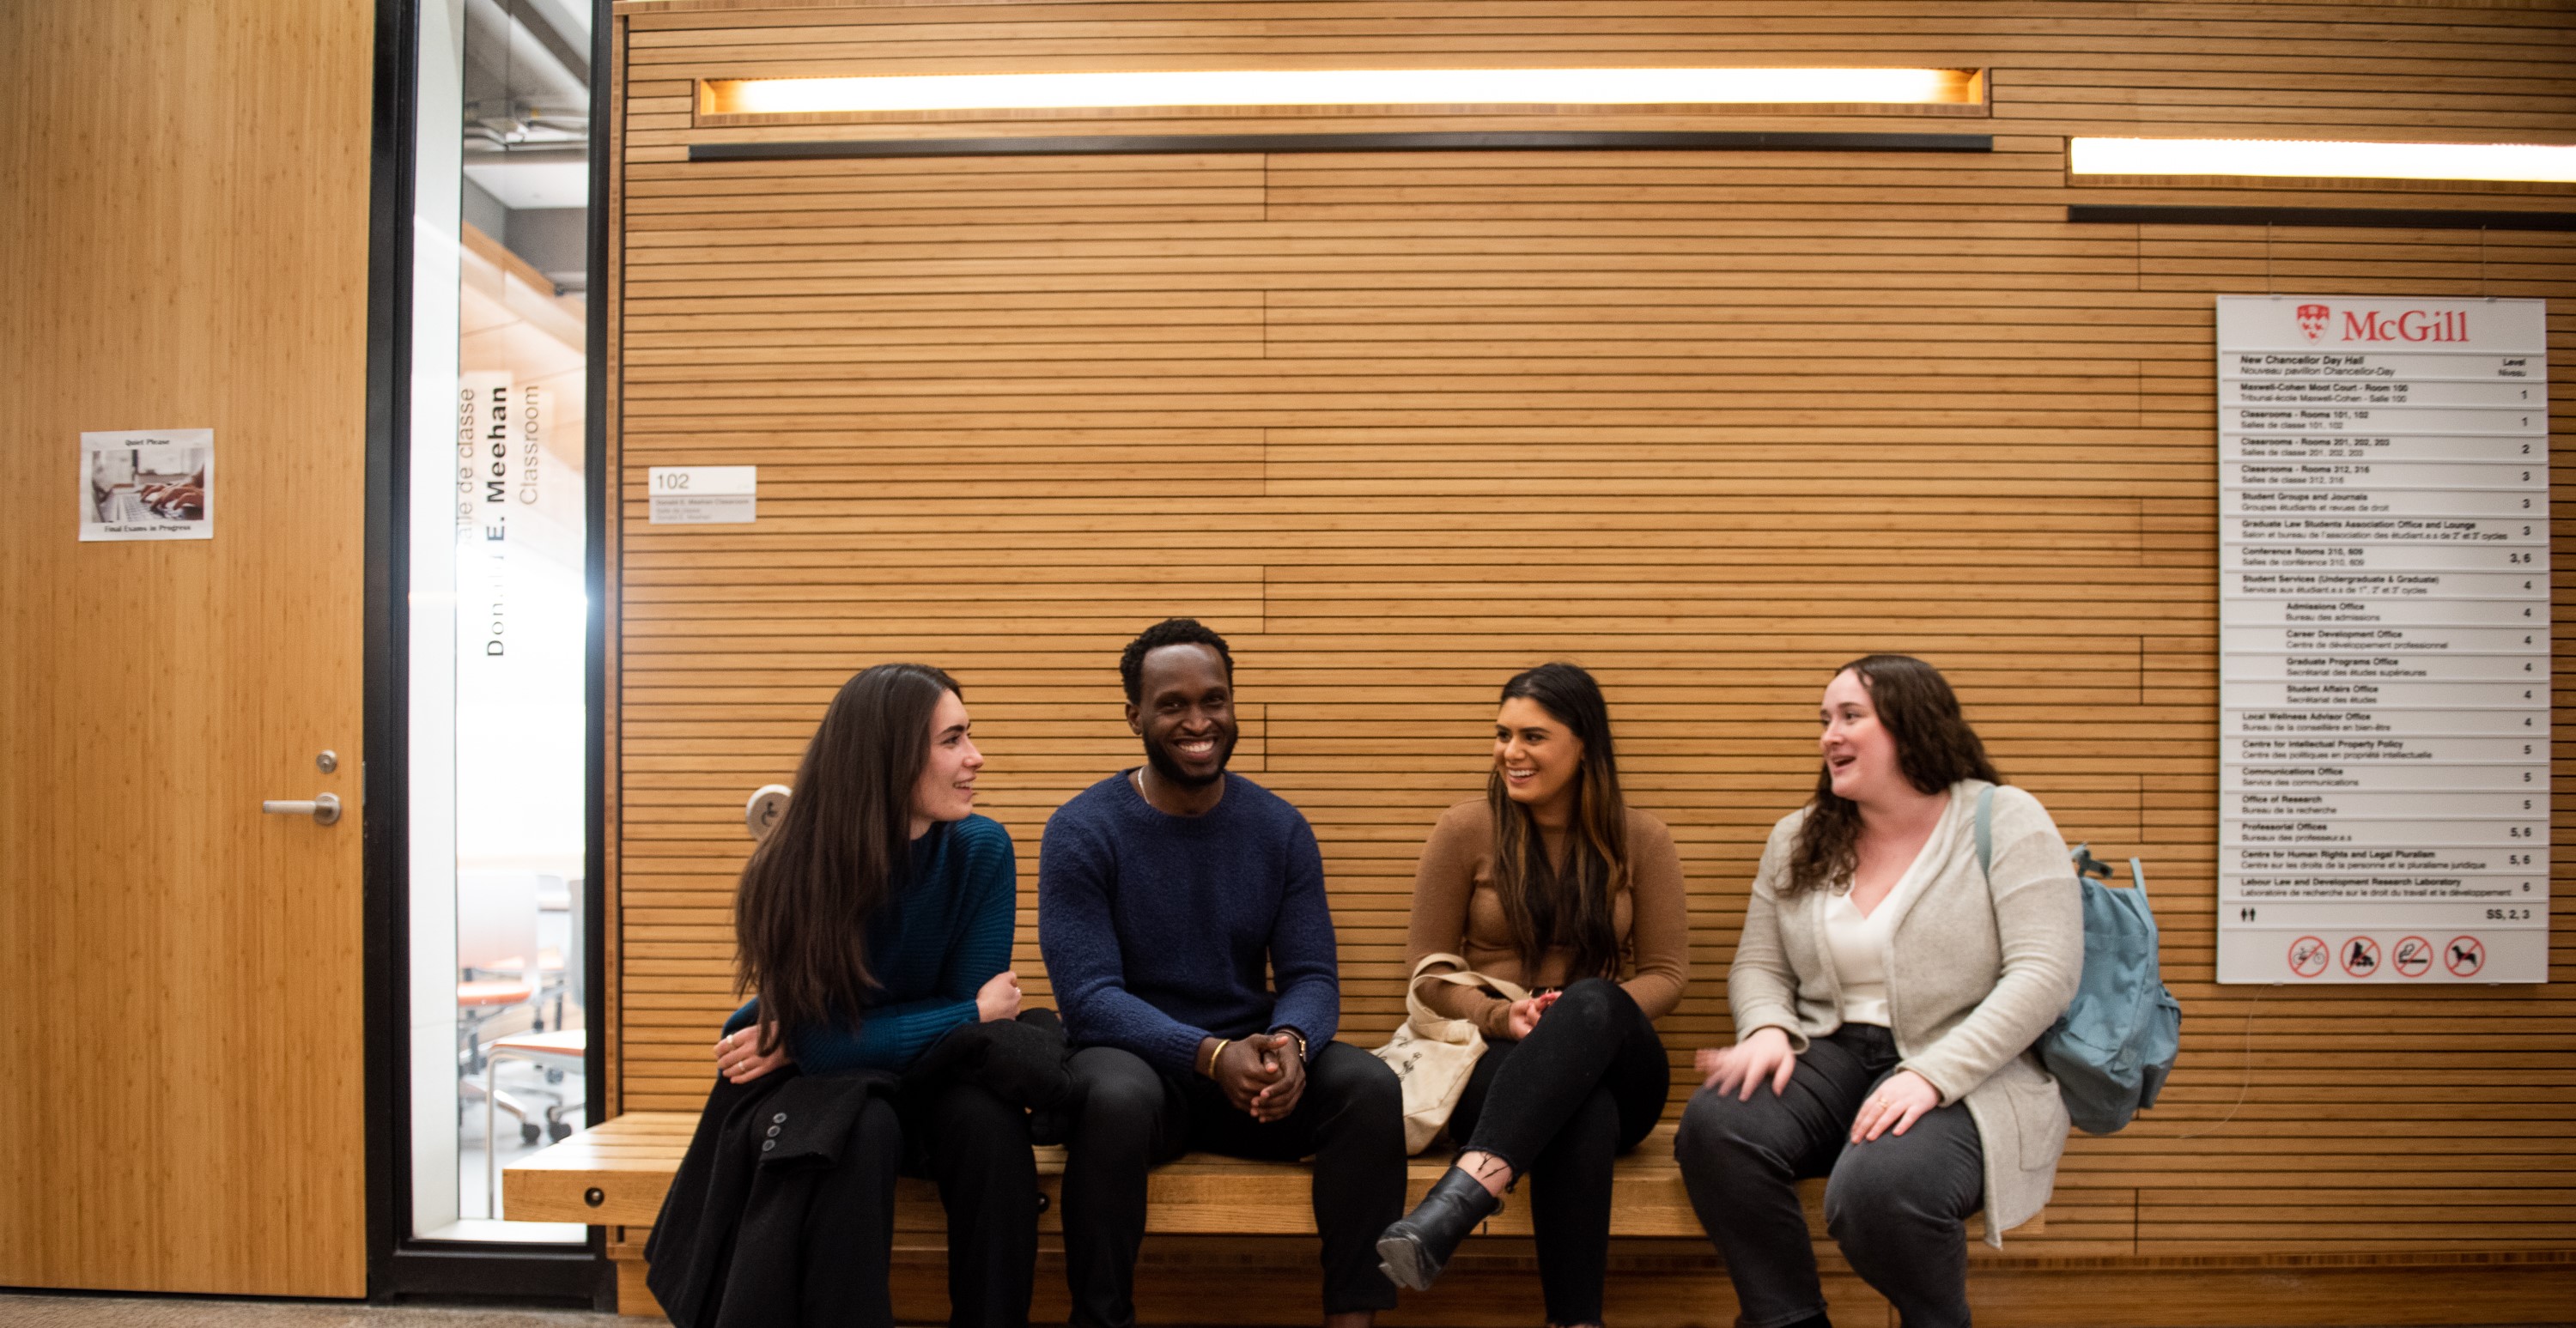 Three white female students and one black male student sitting on a bench discussing and smiling.